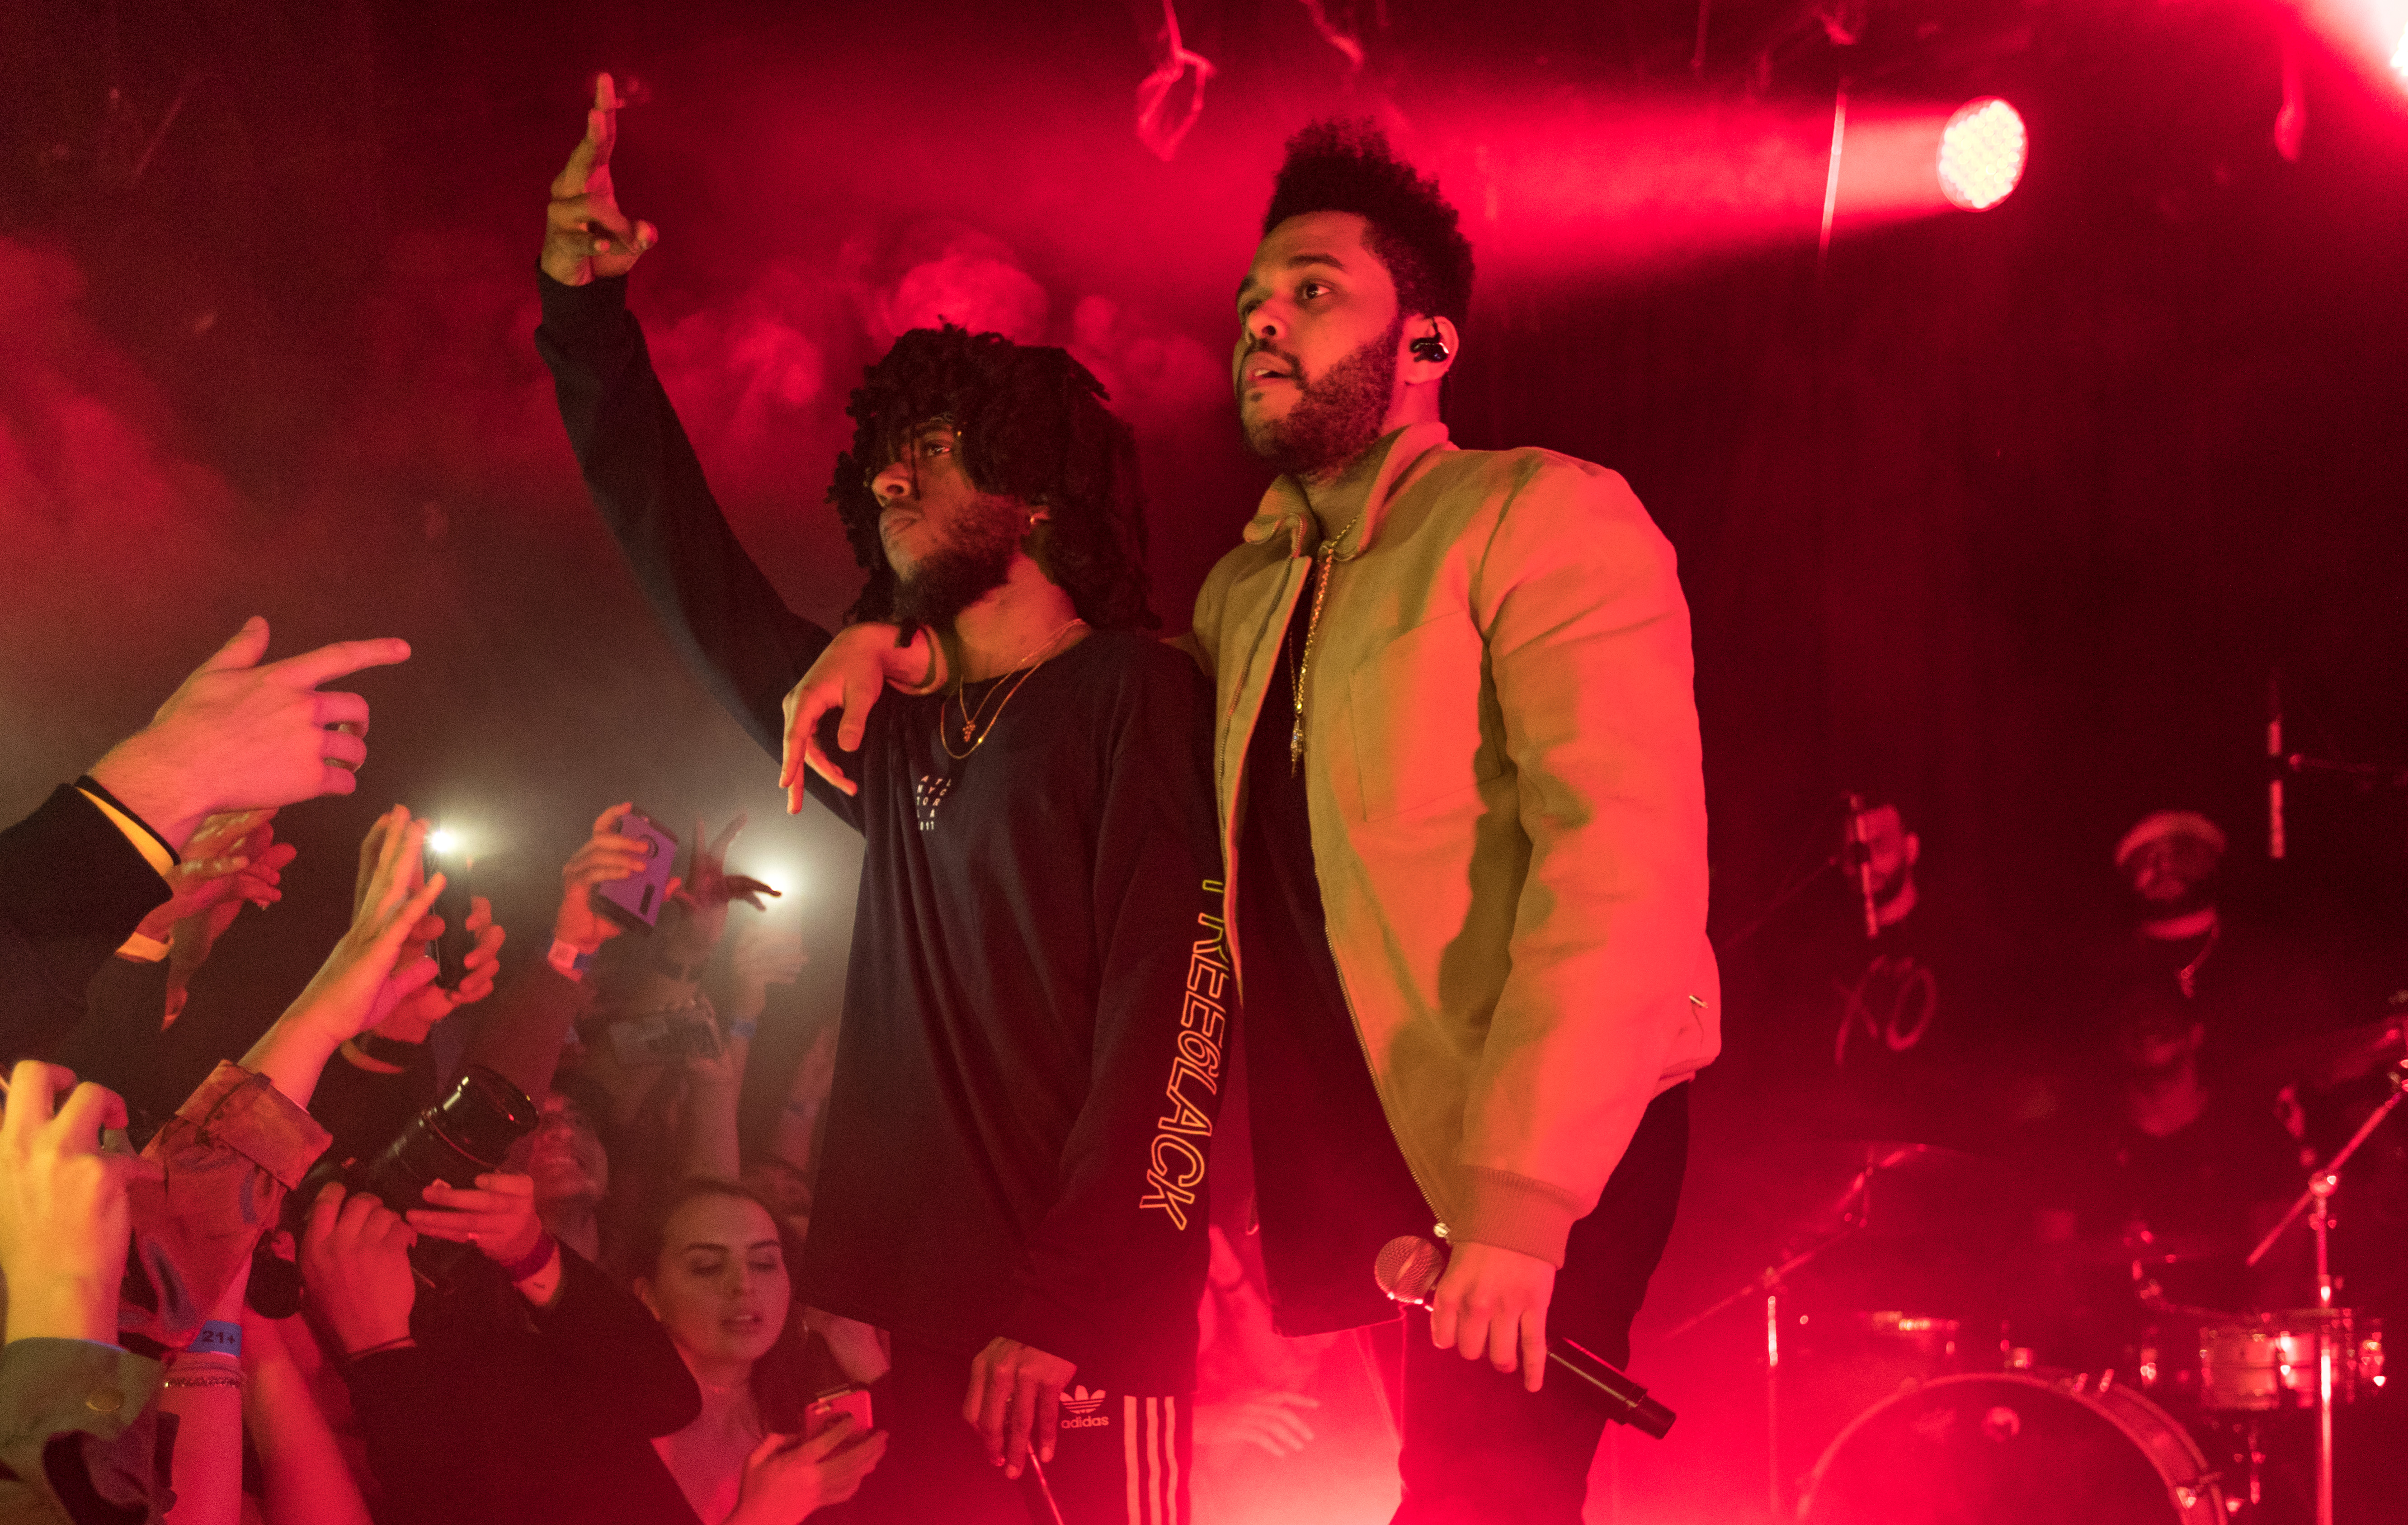 Weekend concerts. The Weeknd. Концерт the Weeknd. The Weeknd Live Concert 2021. 6lack and the Weeknd.